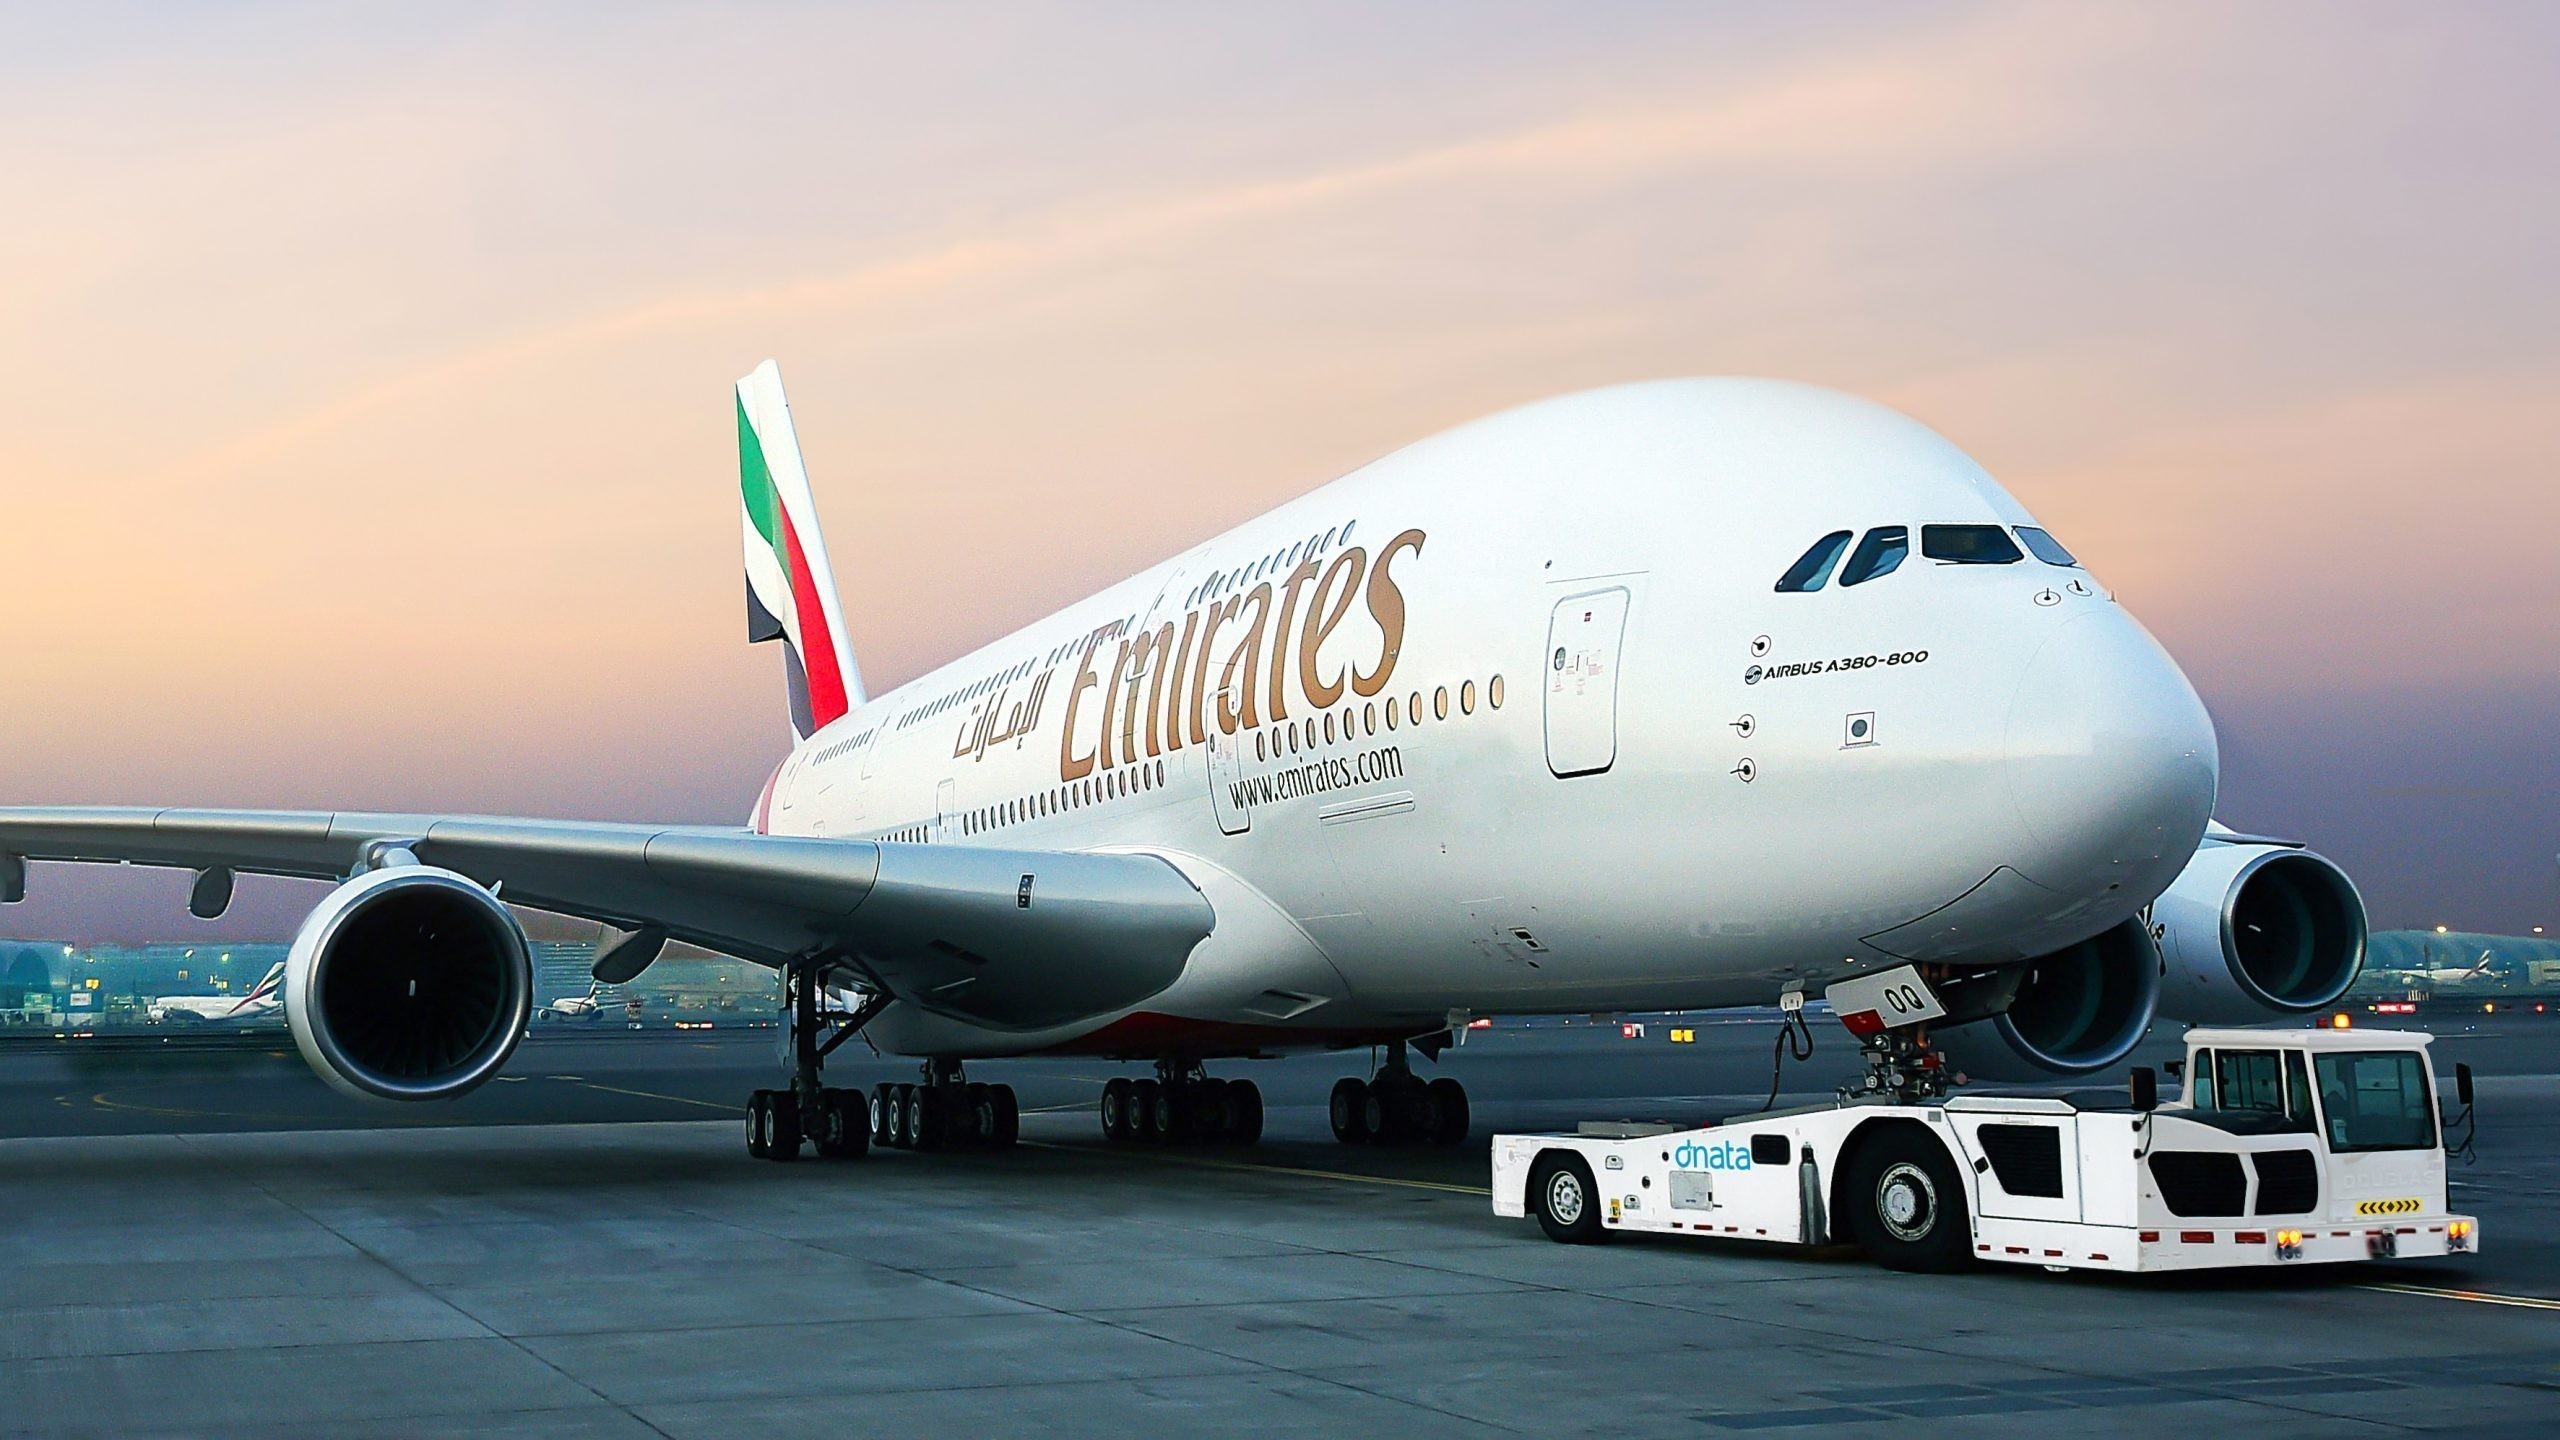 The Emirates Group today announced its first year of loss